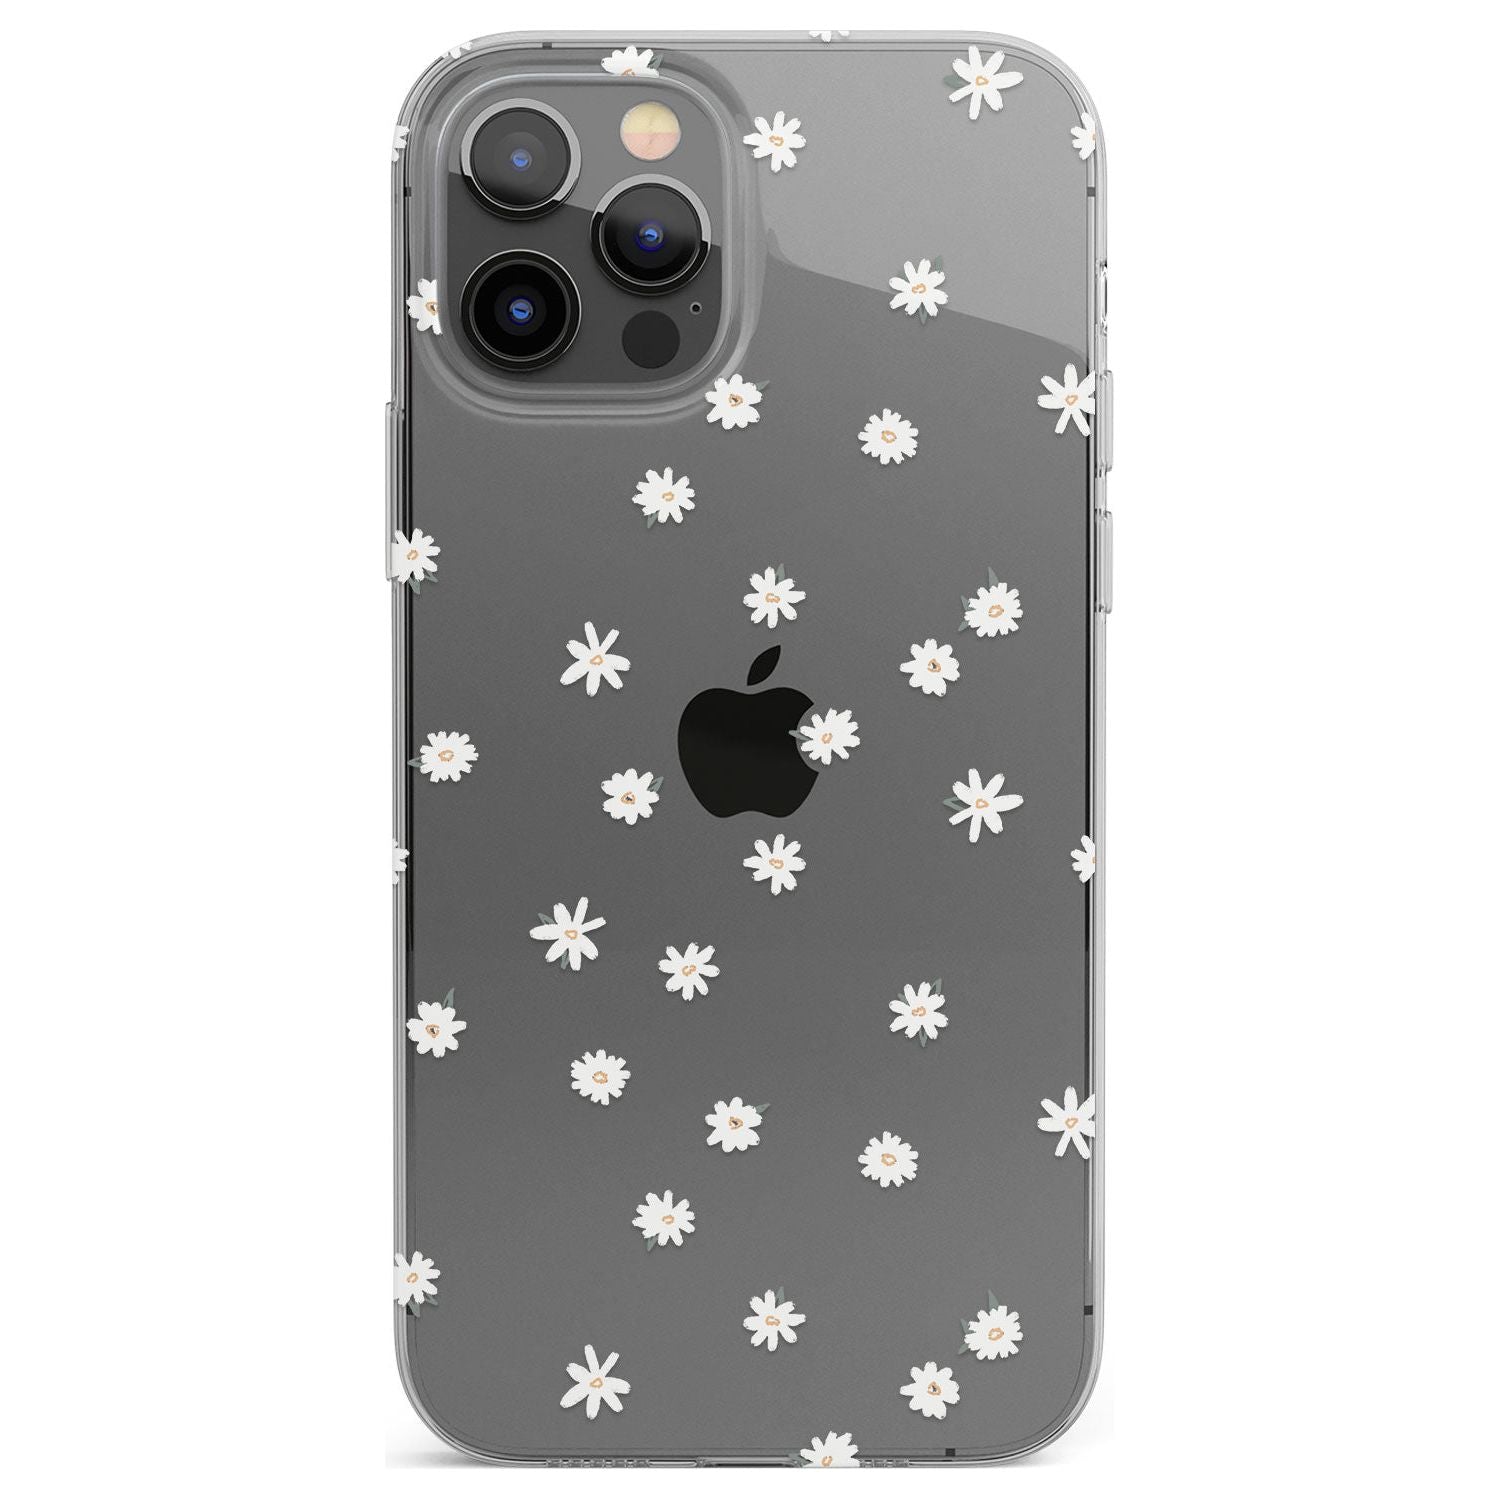 White Stars on Clear Phone Case for iPhone 12 Pro